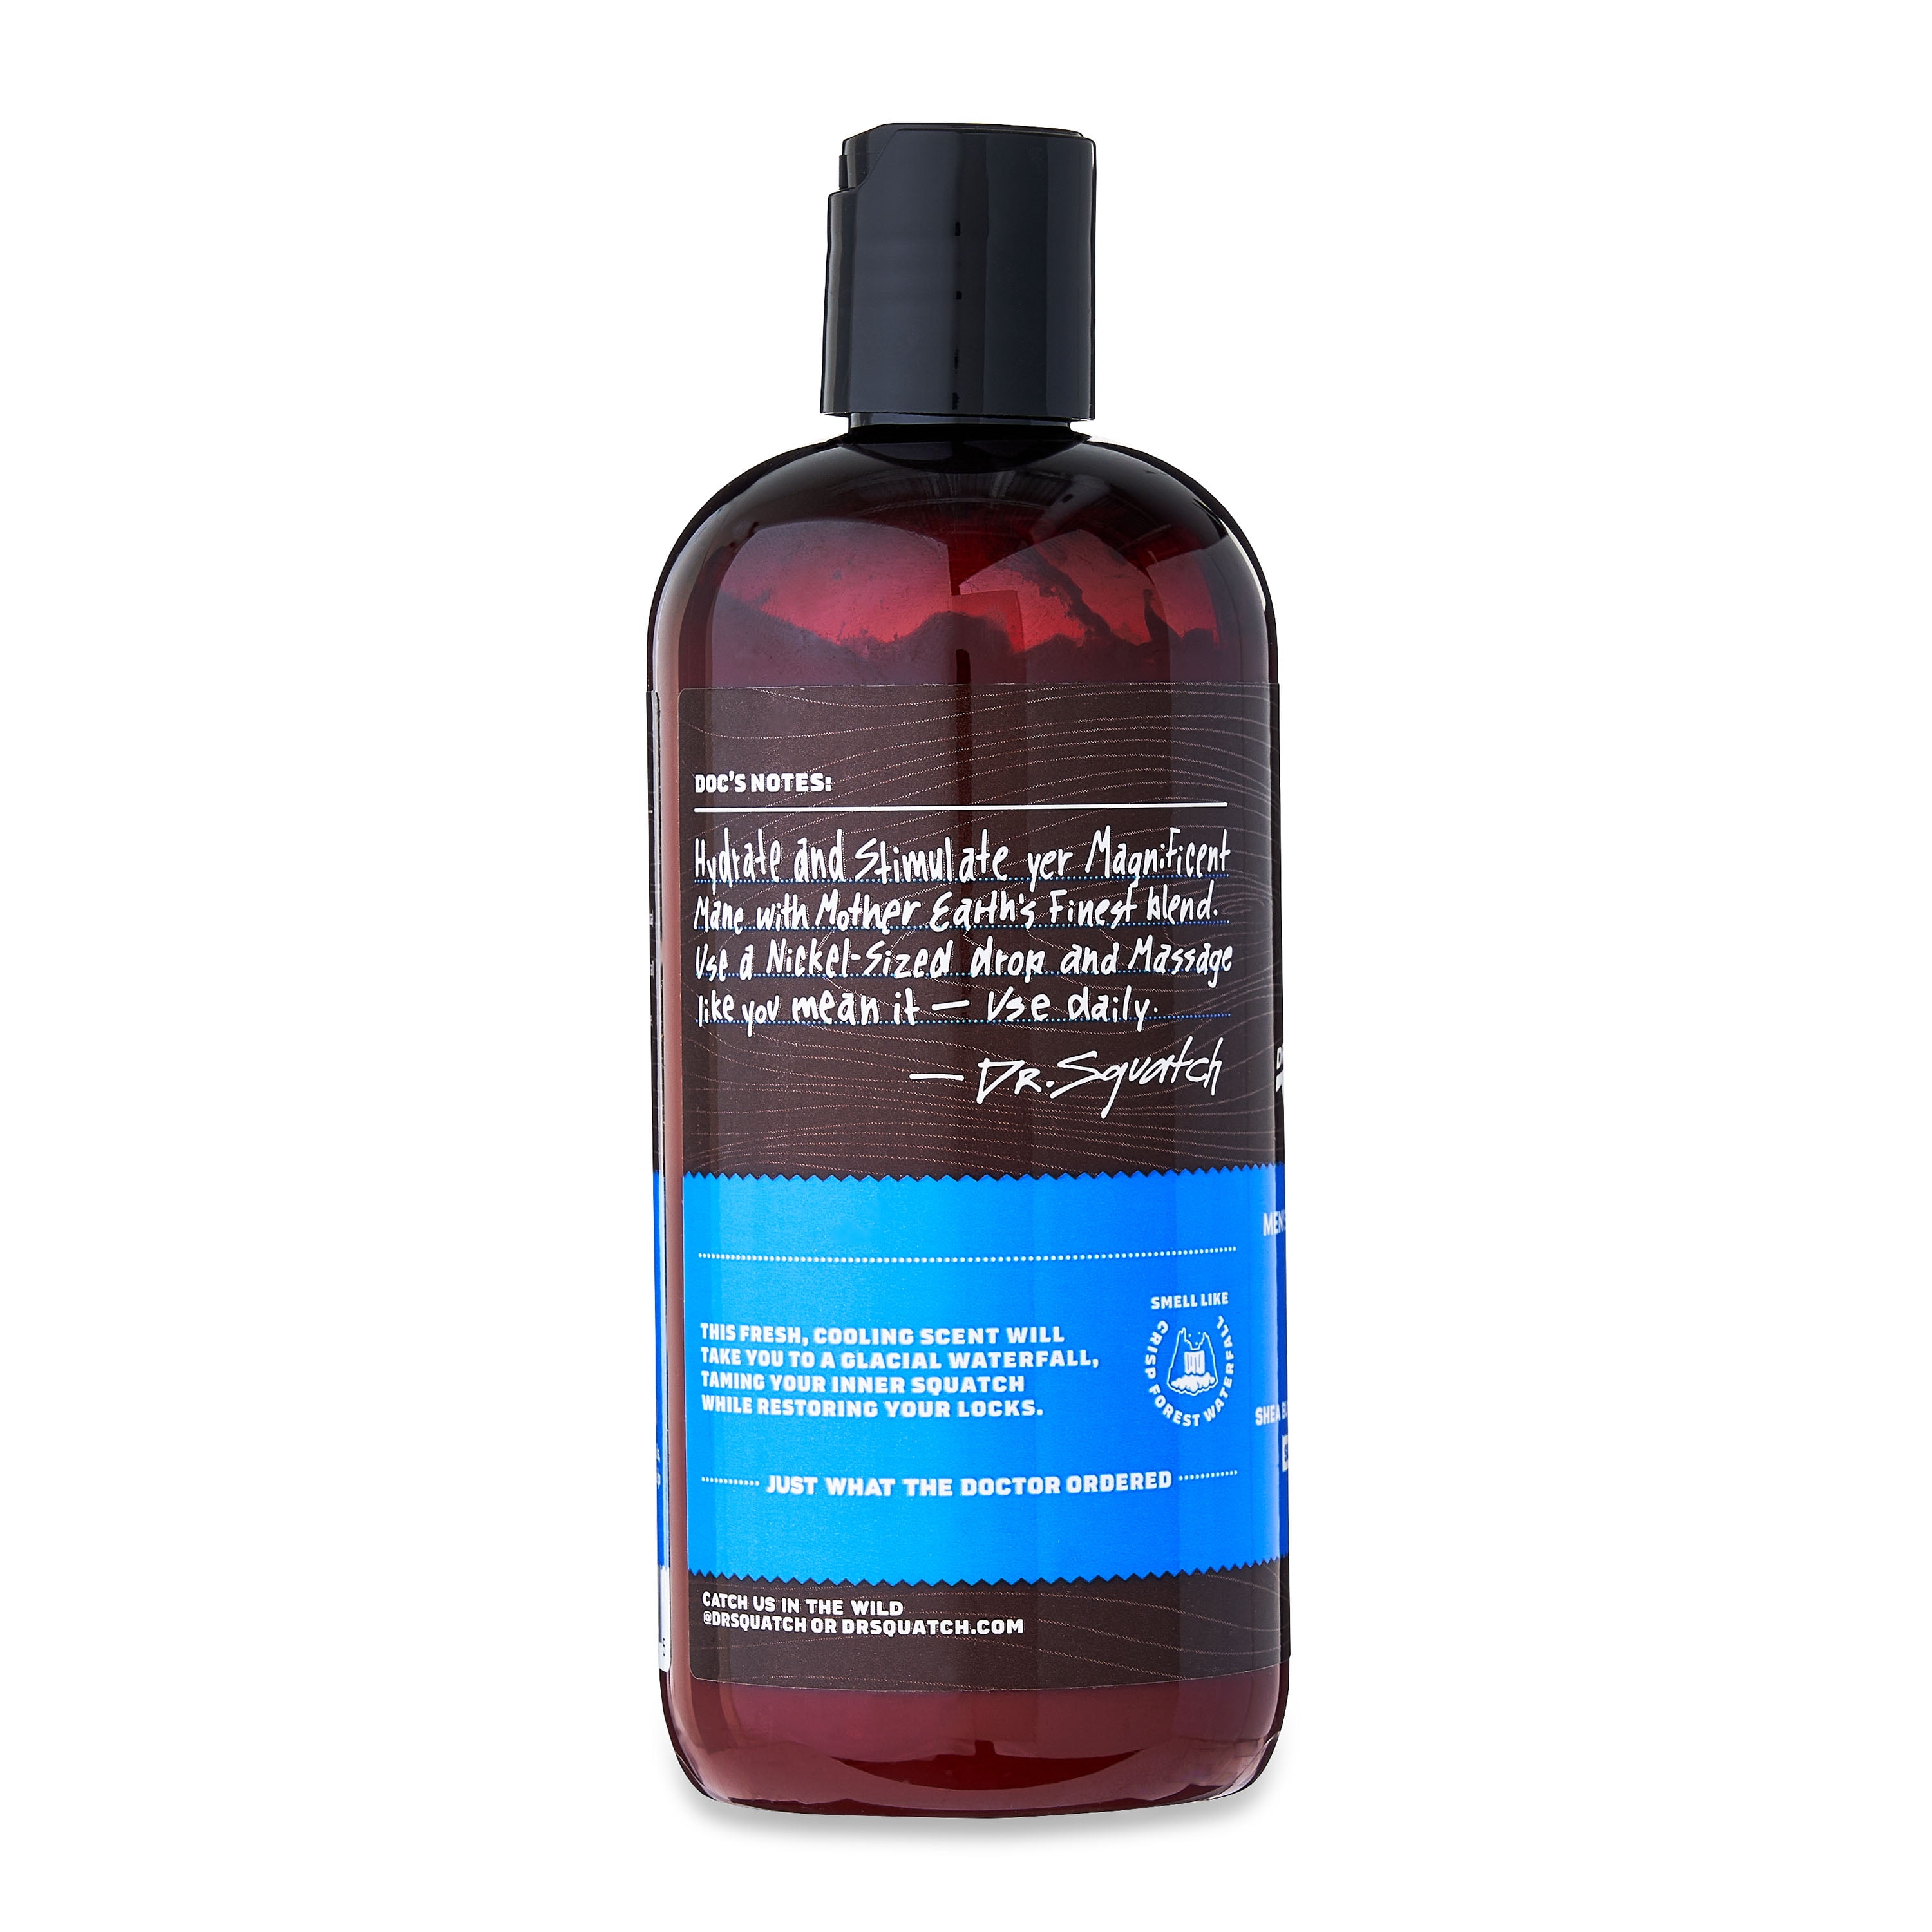 How's everyone's experience been with the Dr Squatch shampoo? : r/DrSquatch